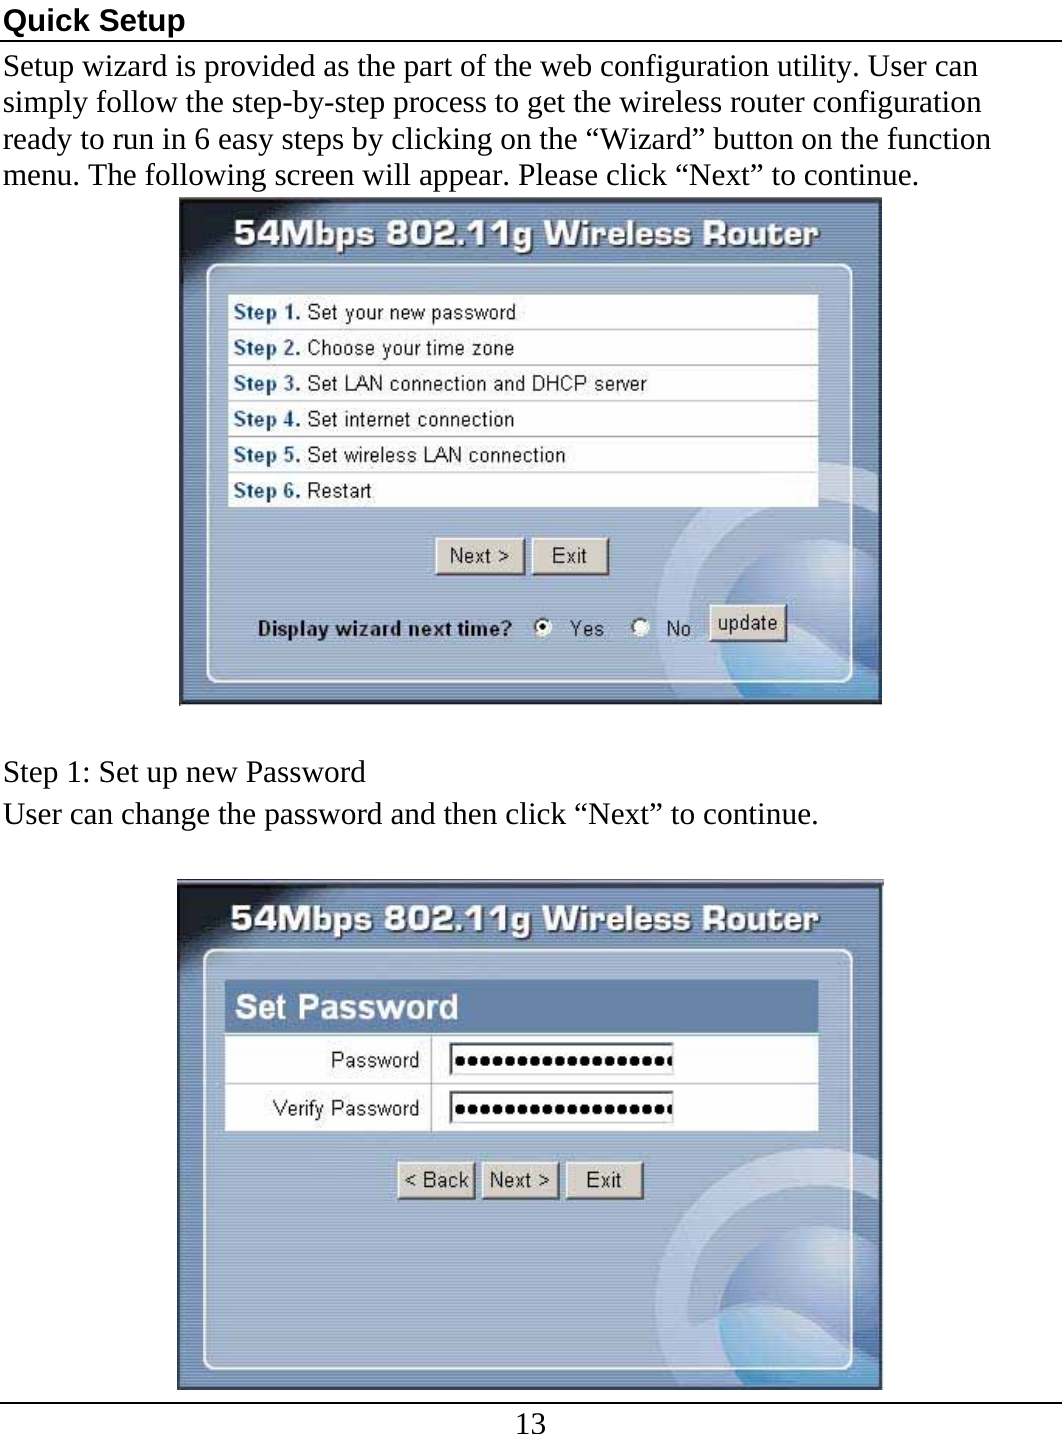 13  Quick Setup Setup wizard is provided as the part of the web configuration utility. User can simply follow the step-by-step process to get the wireless router configuration ready to run in 6 easy steps by clicking on the “Wizard” button on the function menu. The following screen will appear. Please click “Next” to continue.   Step 1: Set up new Password User can change the password and then click “Next” to continue.   